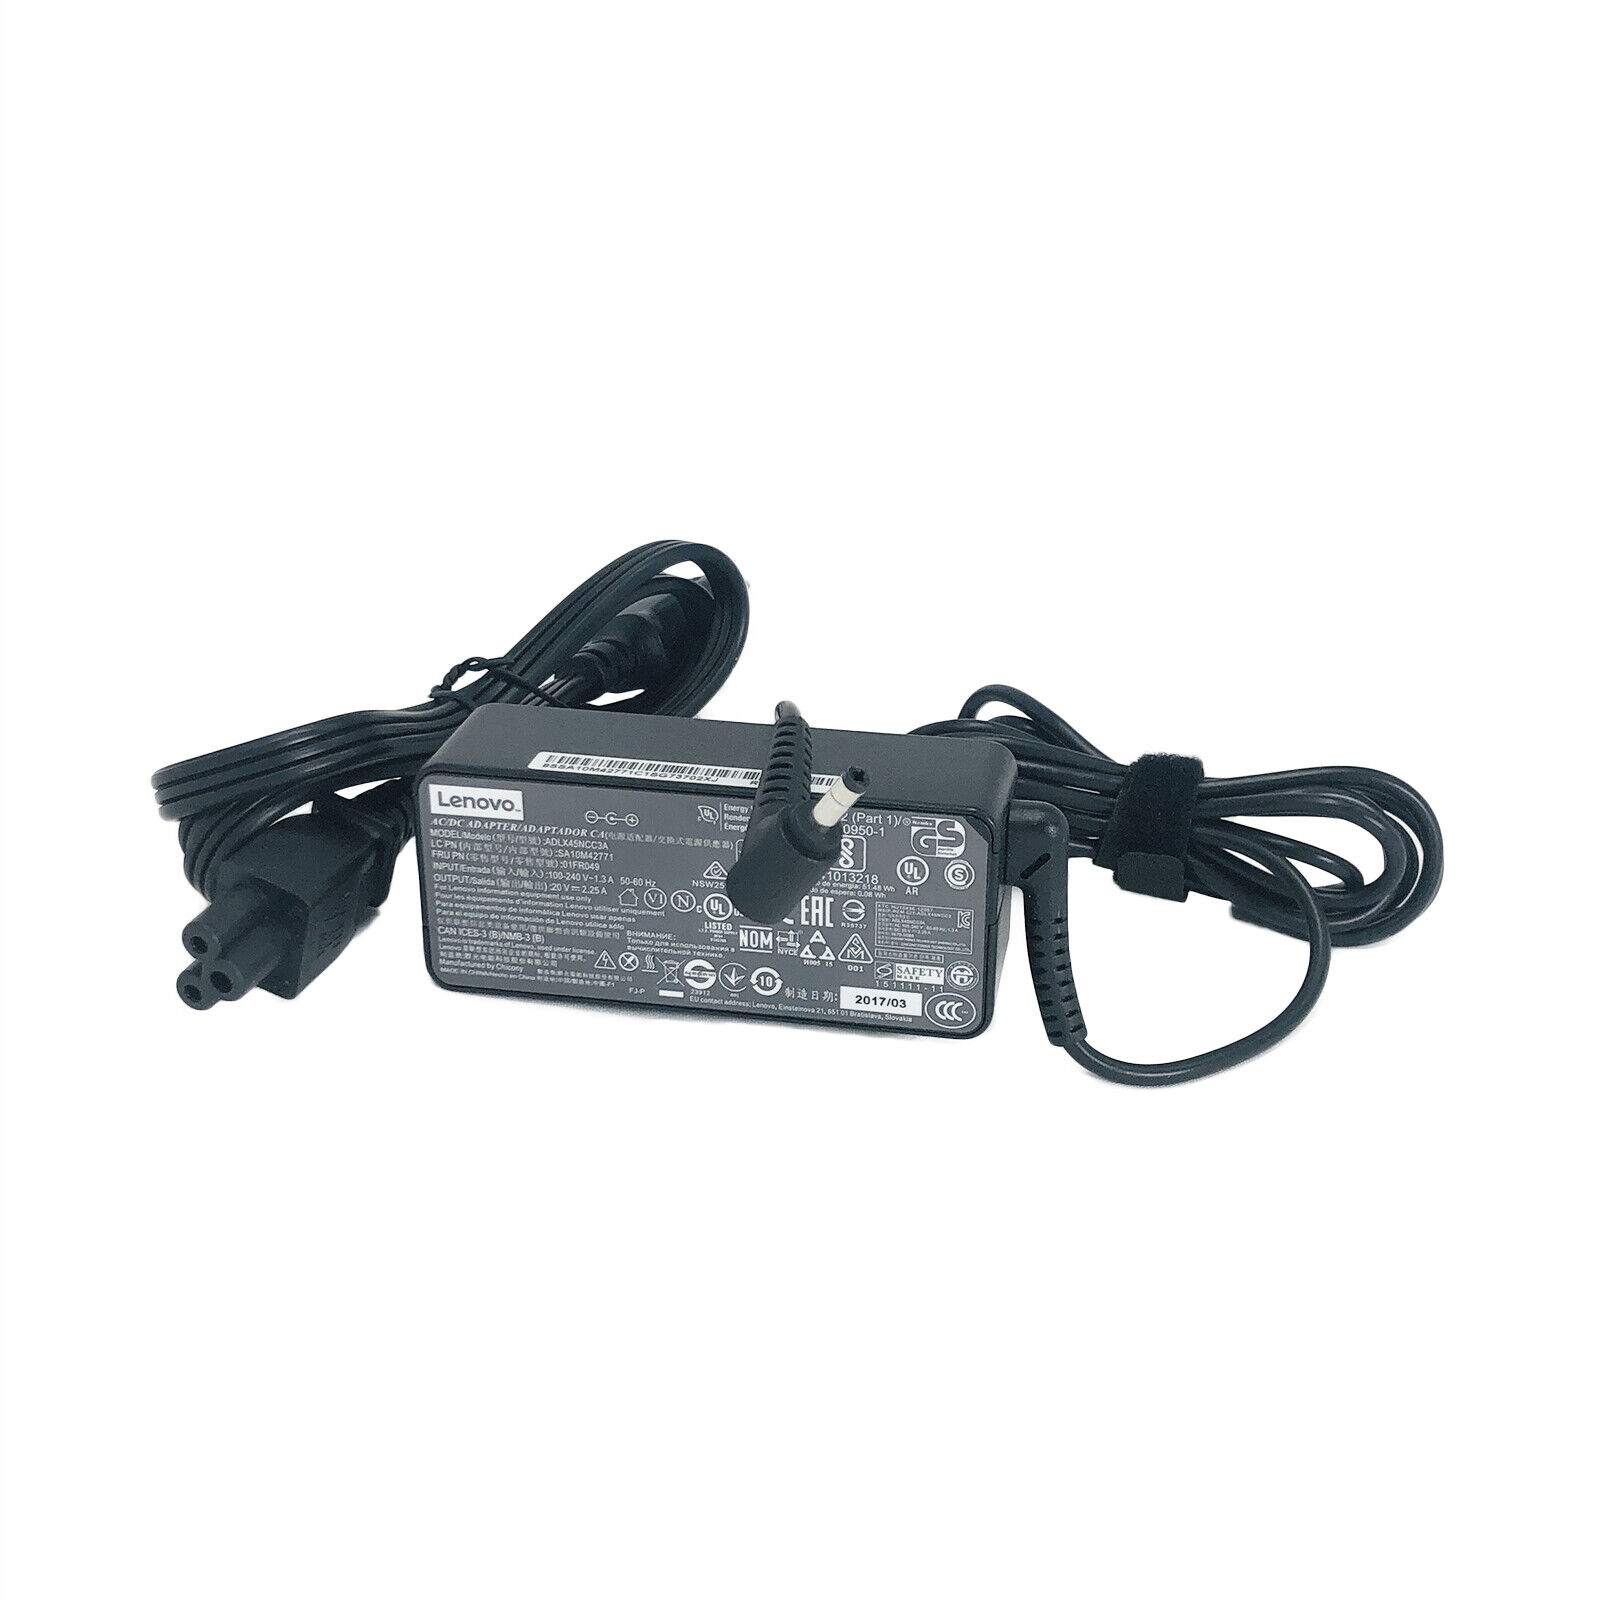 New Genuine Lenovo AC/DC Adapter Charger for IdeaPad Laptop S145-15API w/PC